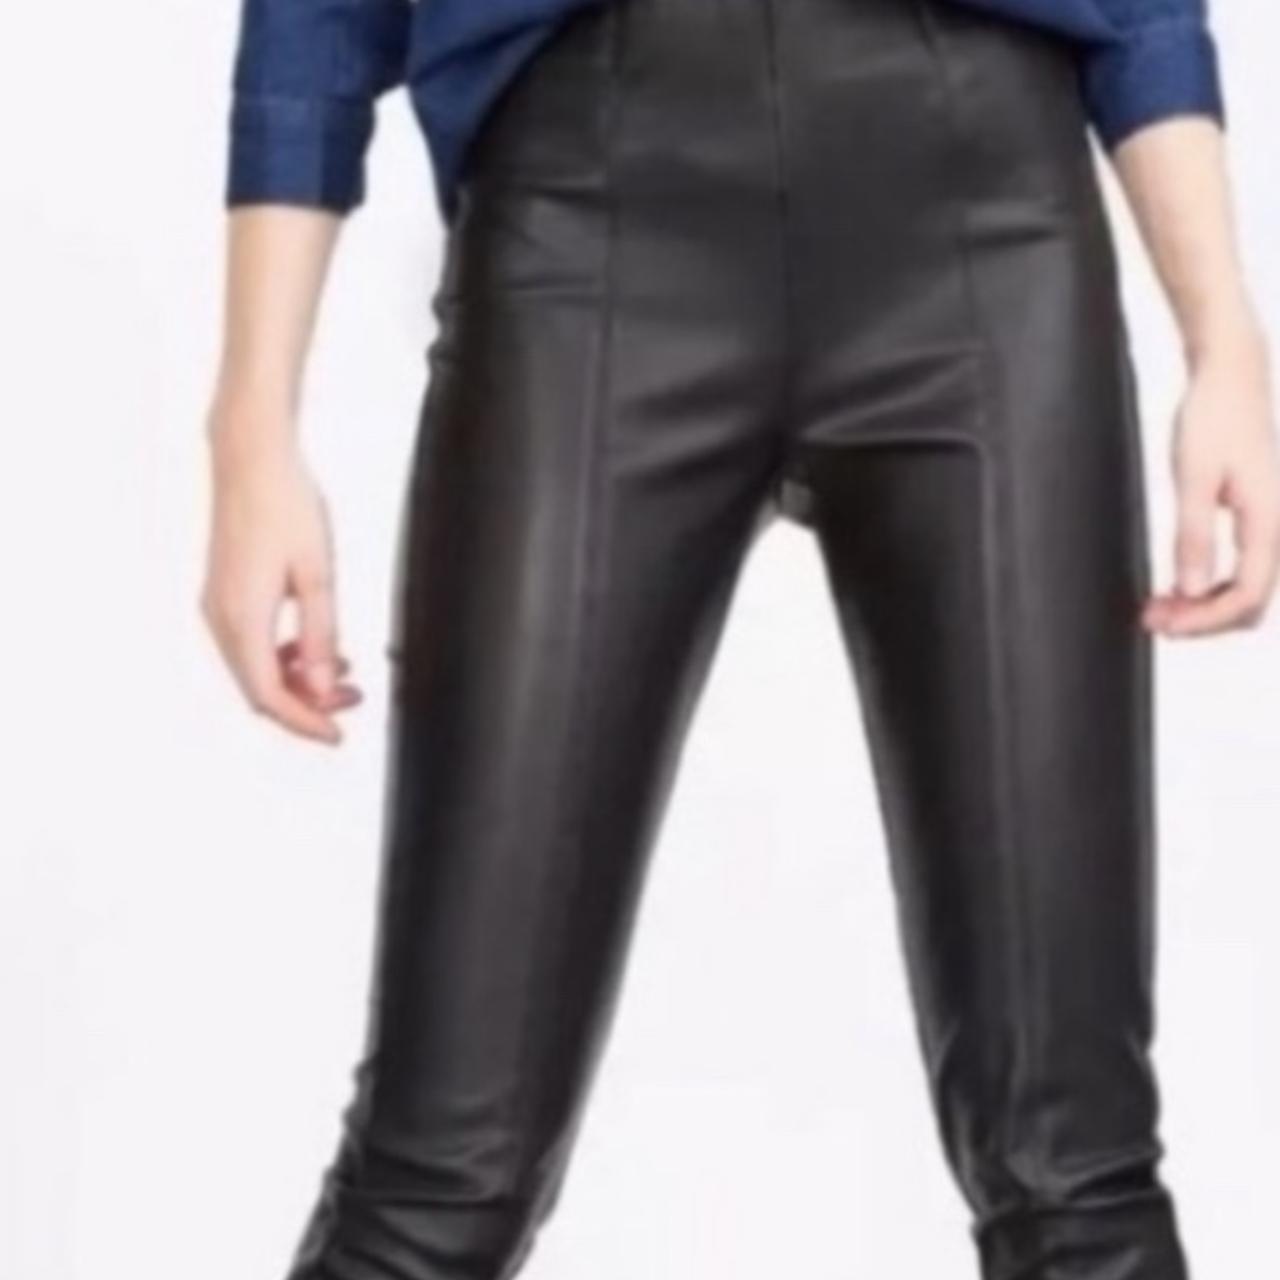 Zara faux leather trousers with side zip. Only worn